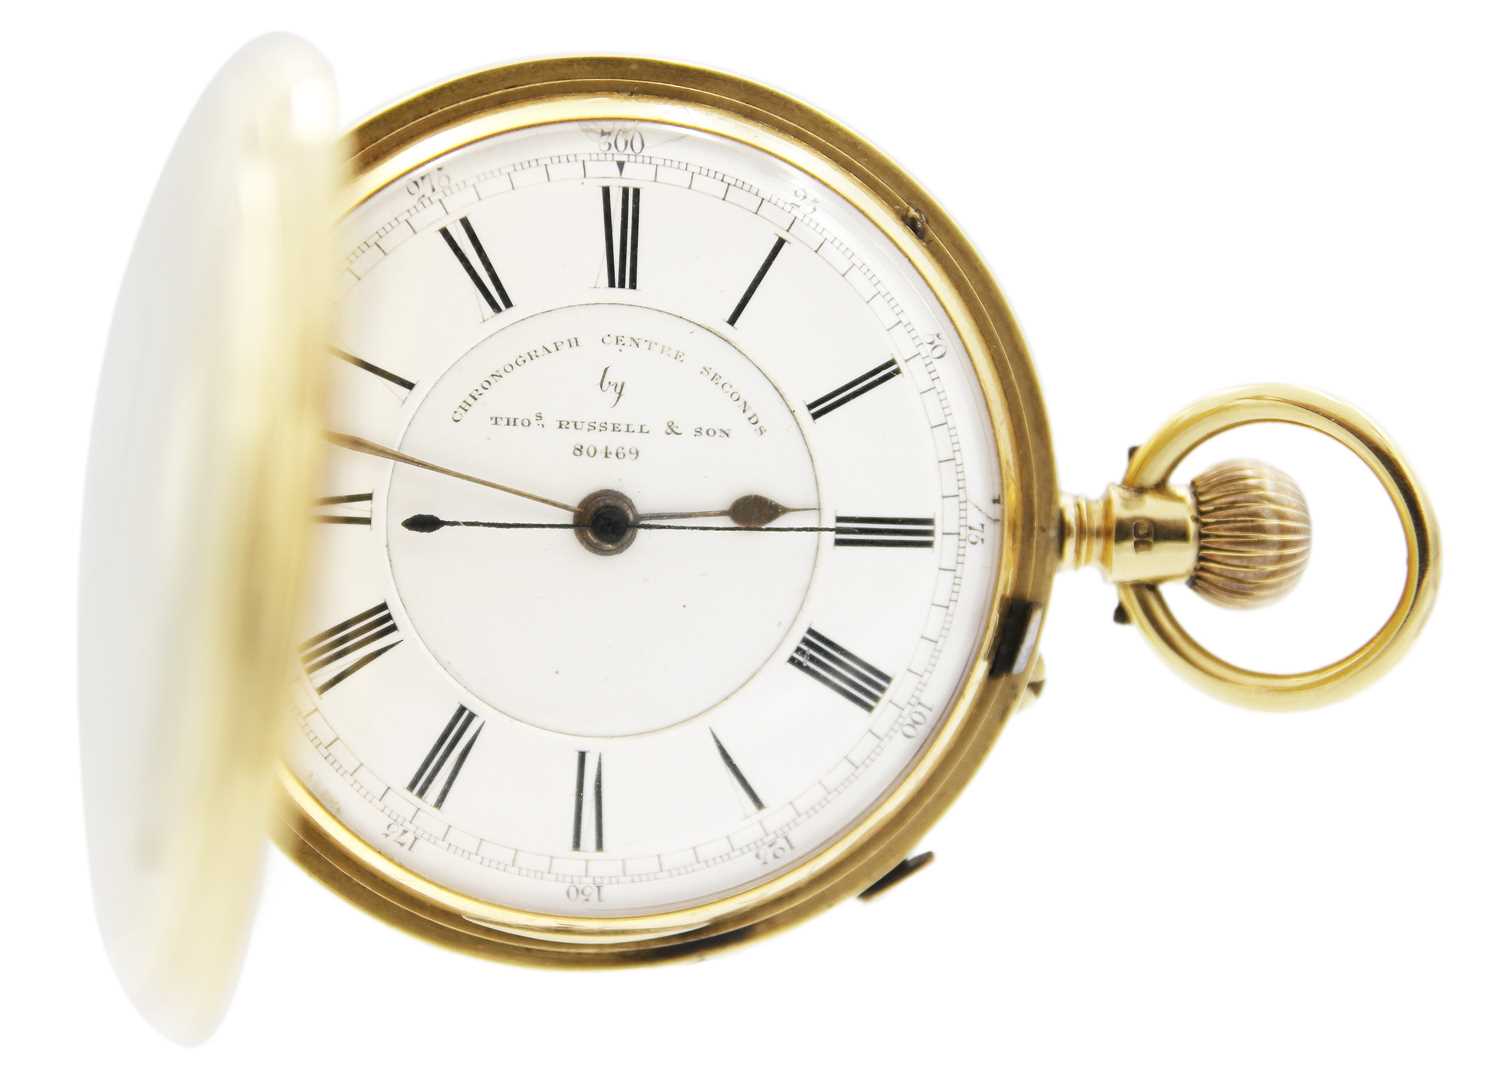 An 18ct chronograph centre seconds crown wind full hunter pocket watch by Thomas Russell & Son.